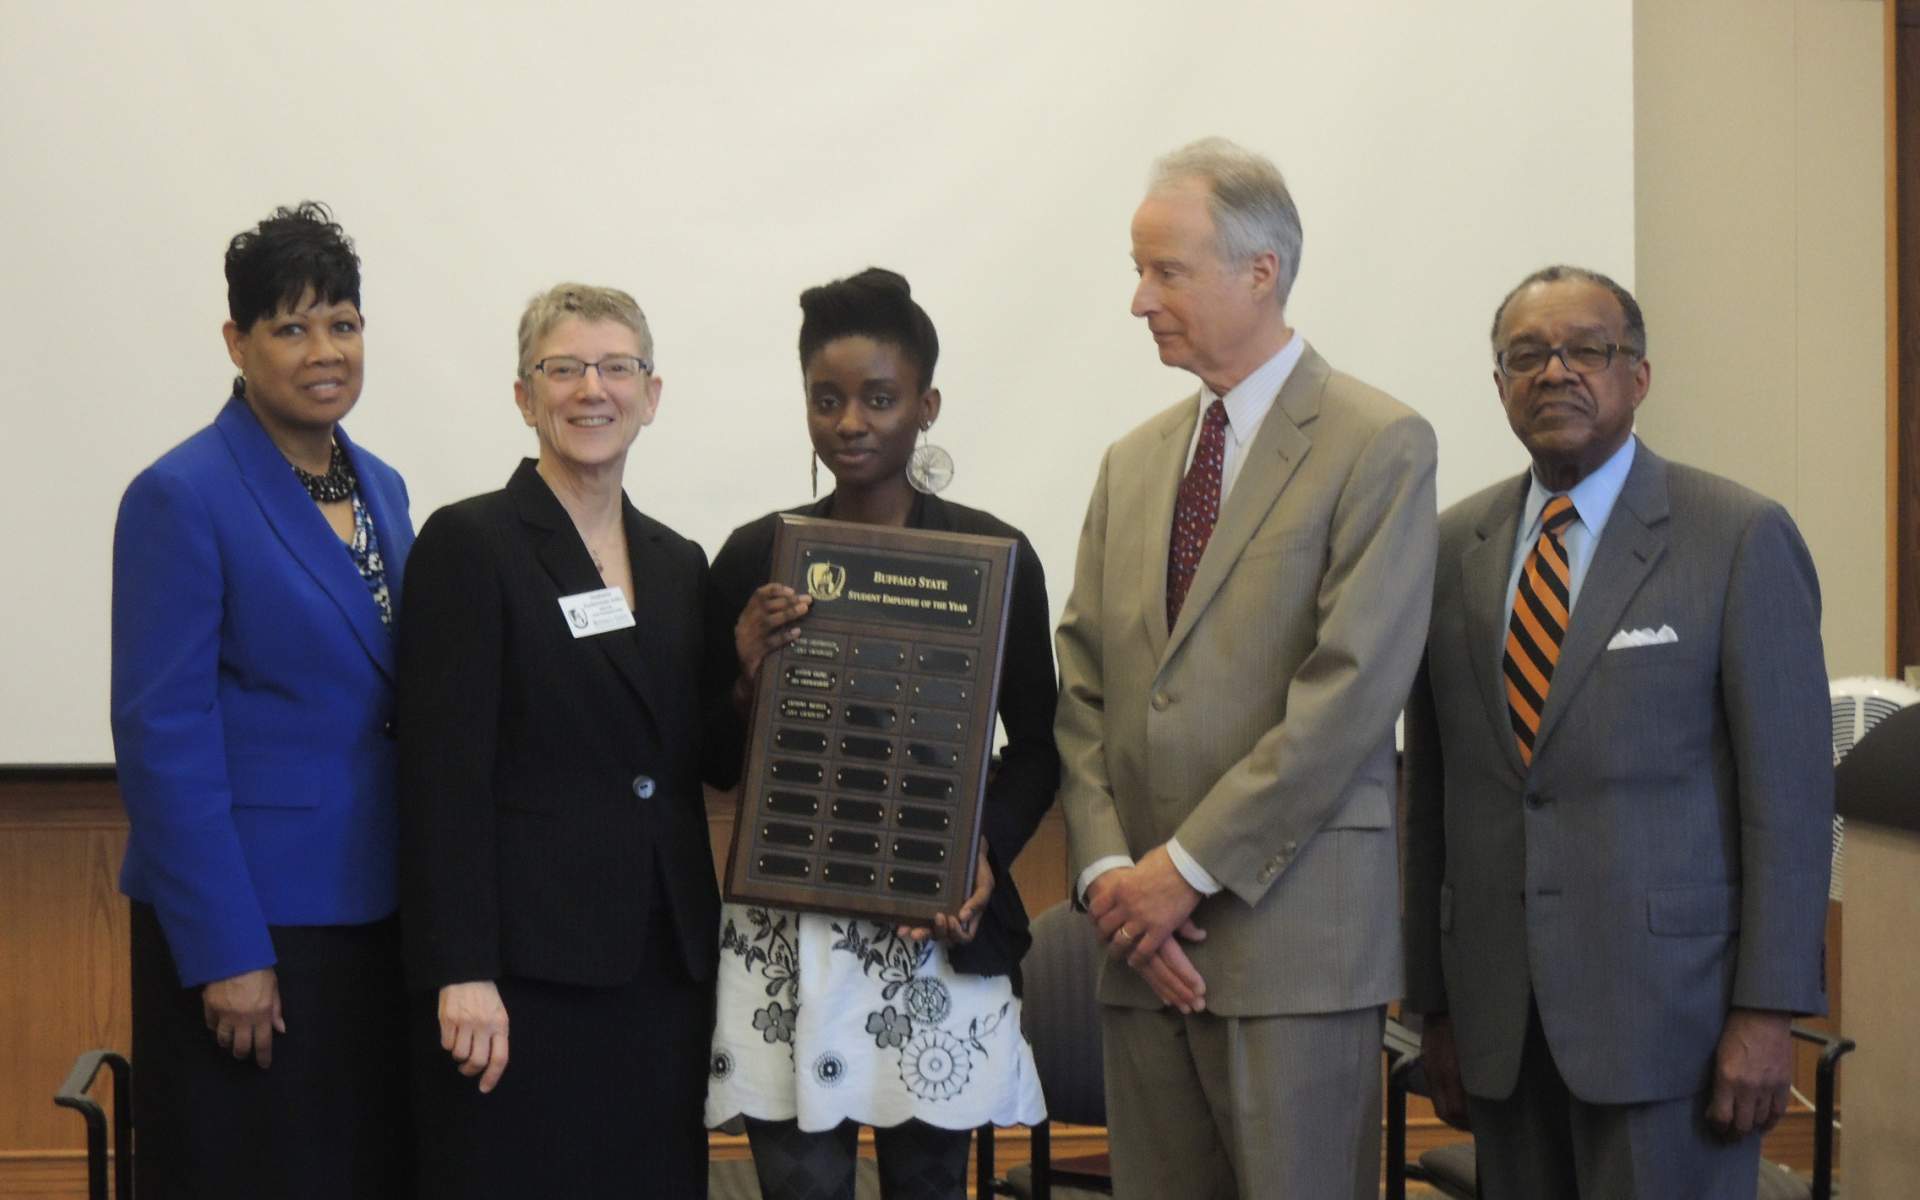 Esther Ekong recieving the Undergraduate Student of the Year Award